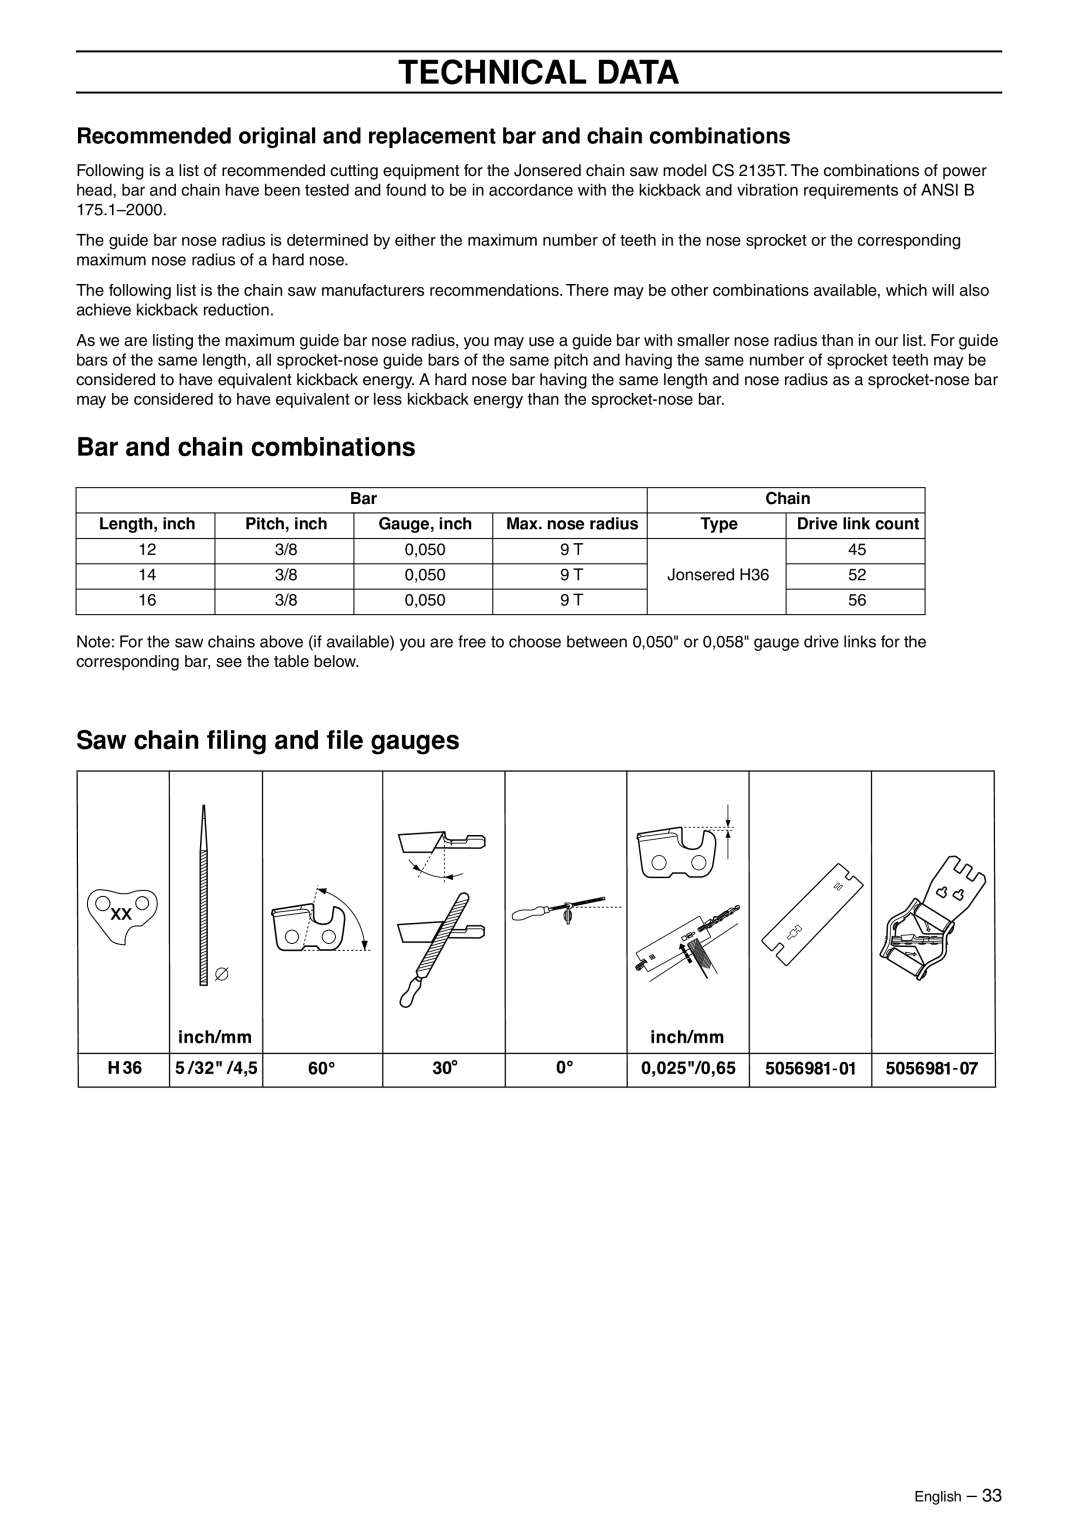 Jonsered CS 2135T manual Bar and chain combinations, Saw chain ﬁling and ﬁle gauges, Technical Data 